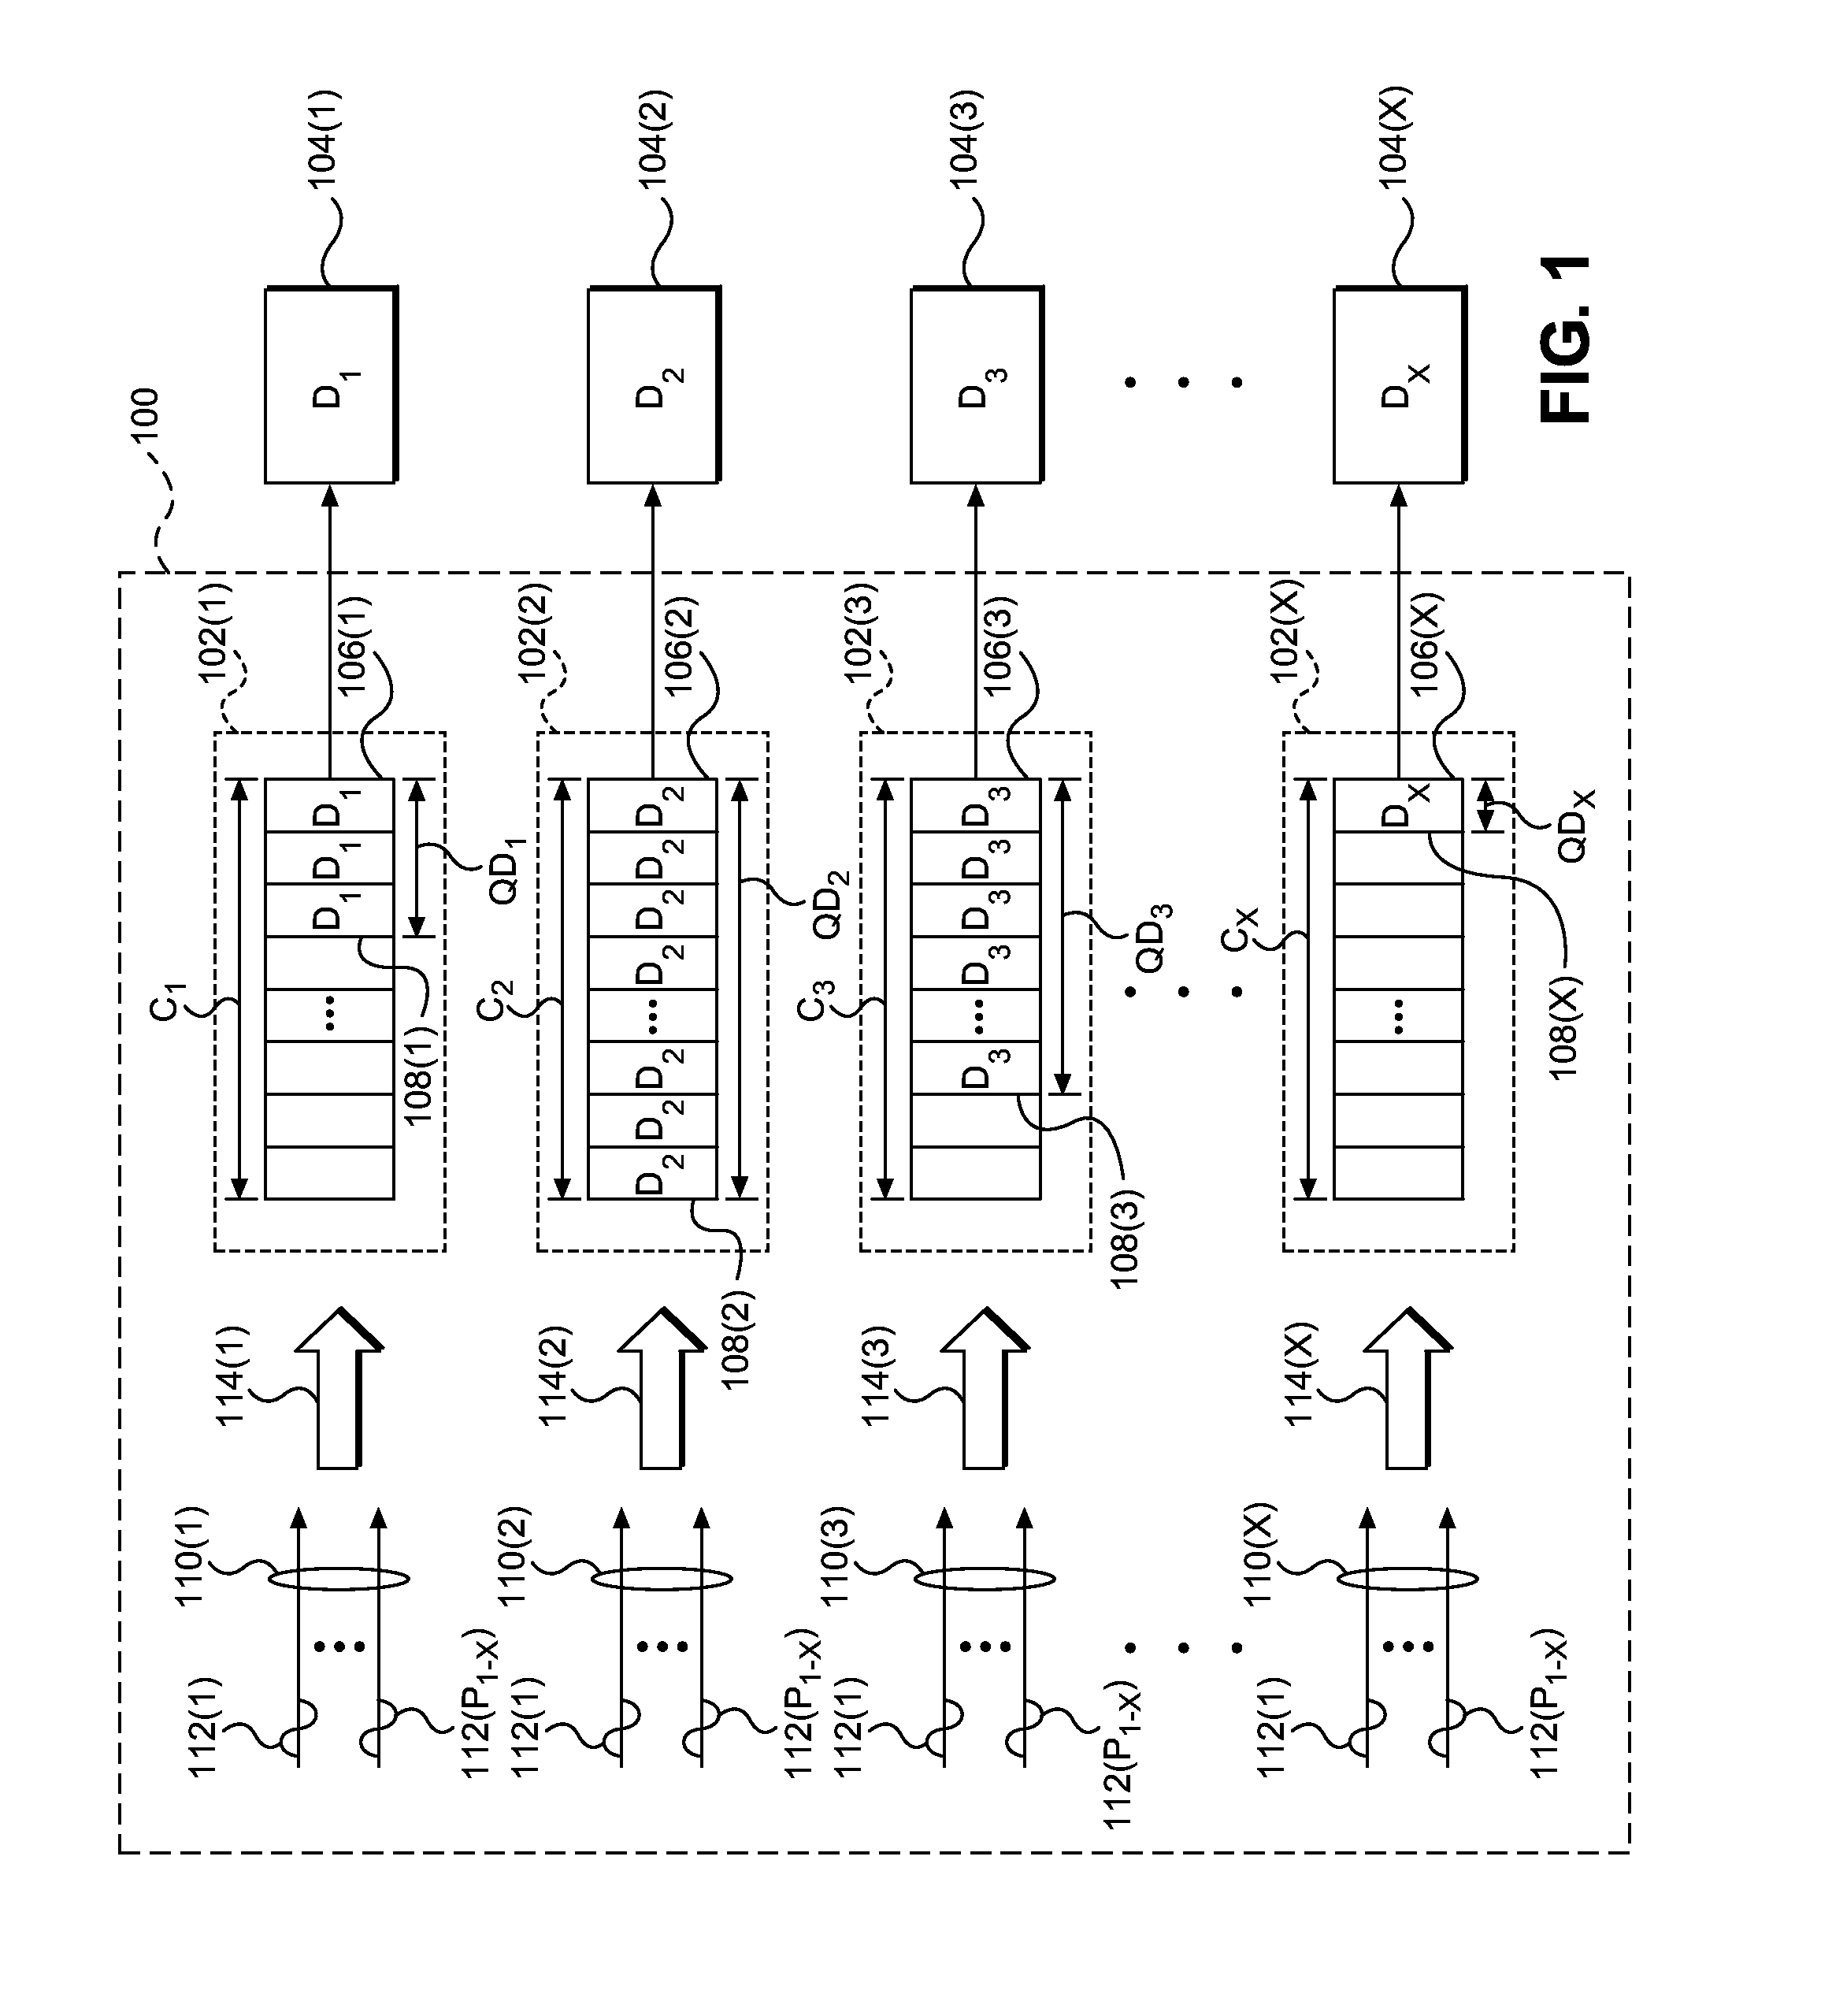 Head-of-line blocking (HOLB) mitigation in communication devices